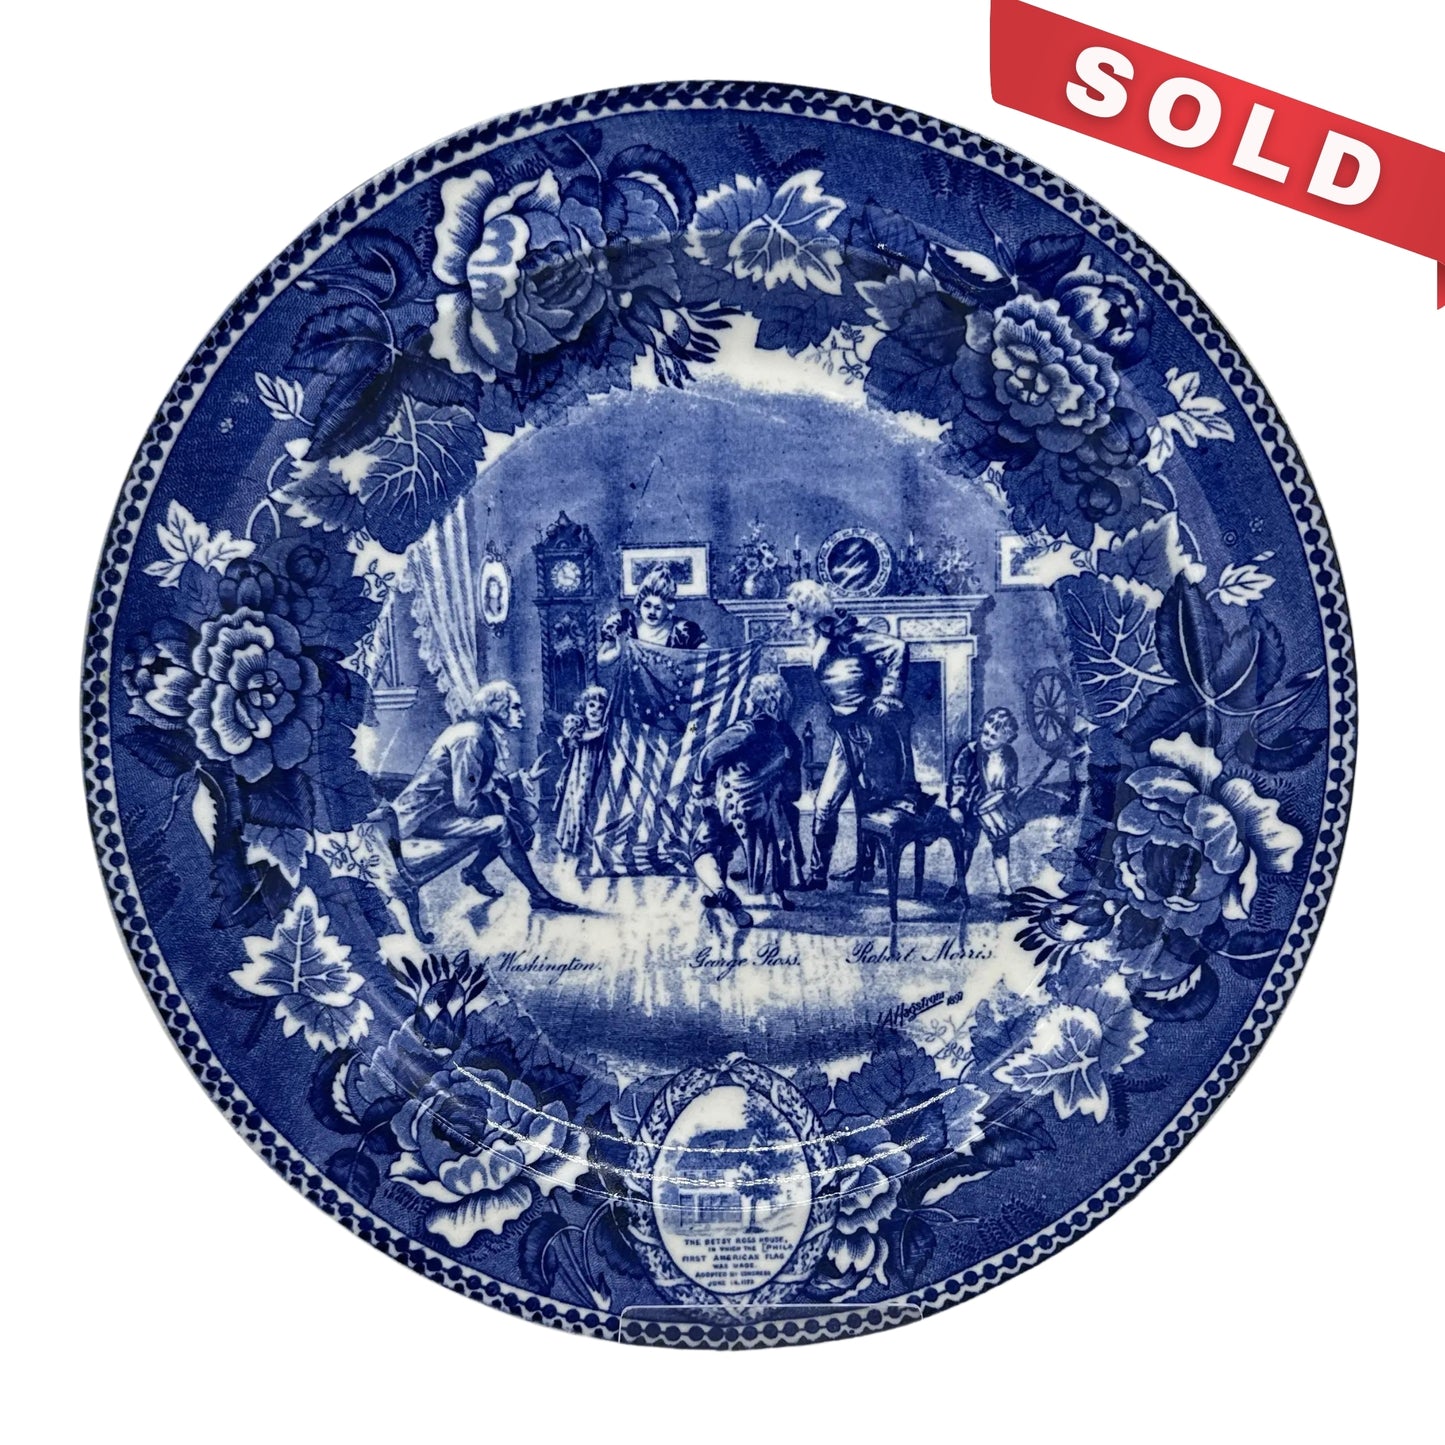 Historical plates from Staffordshire and Wedgwood